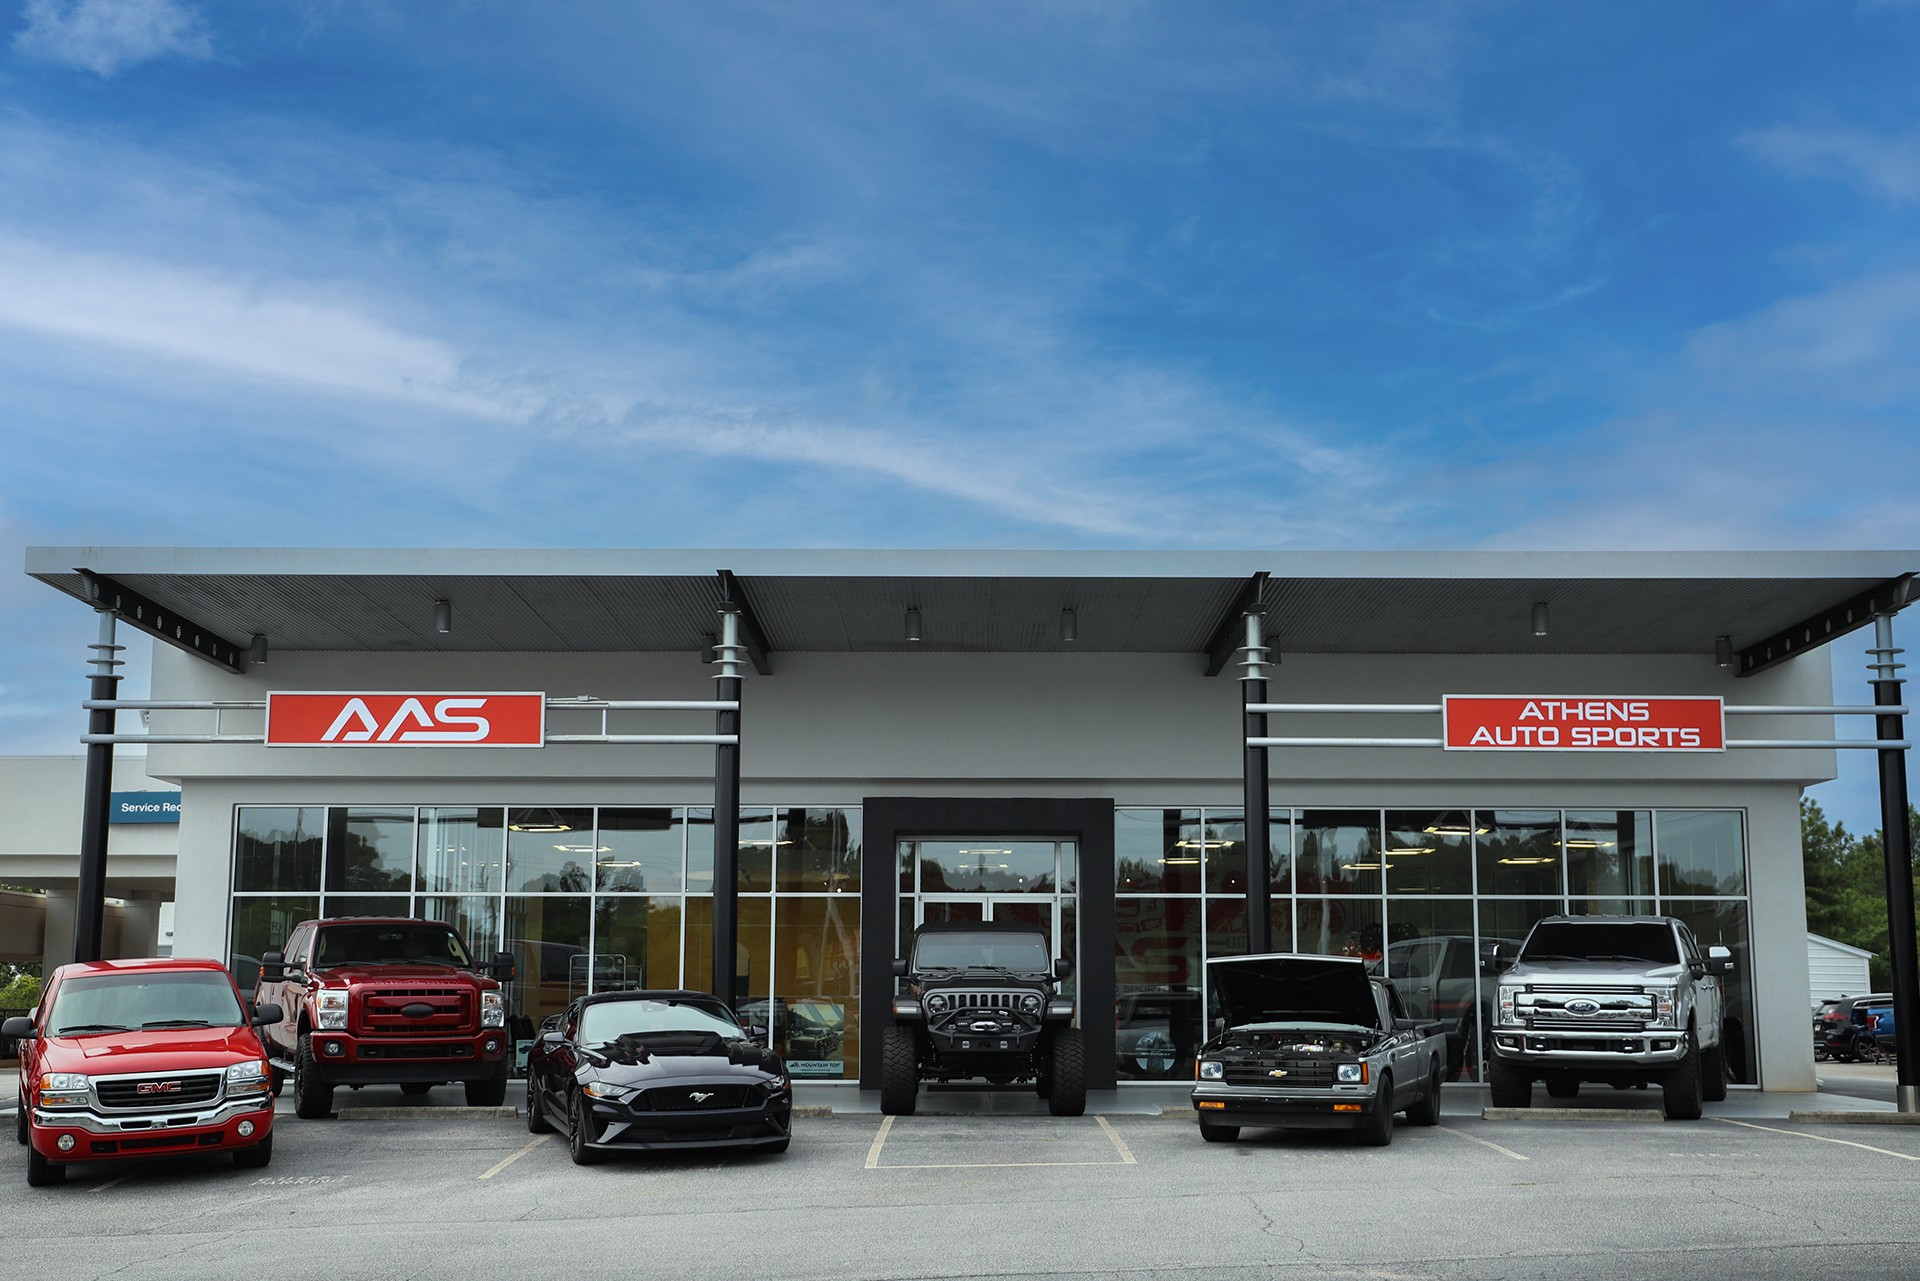 Athens Auto Sports Storefront with Customized Cars and Trucks